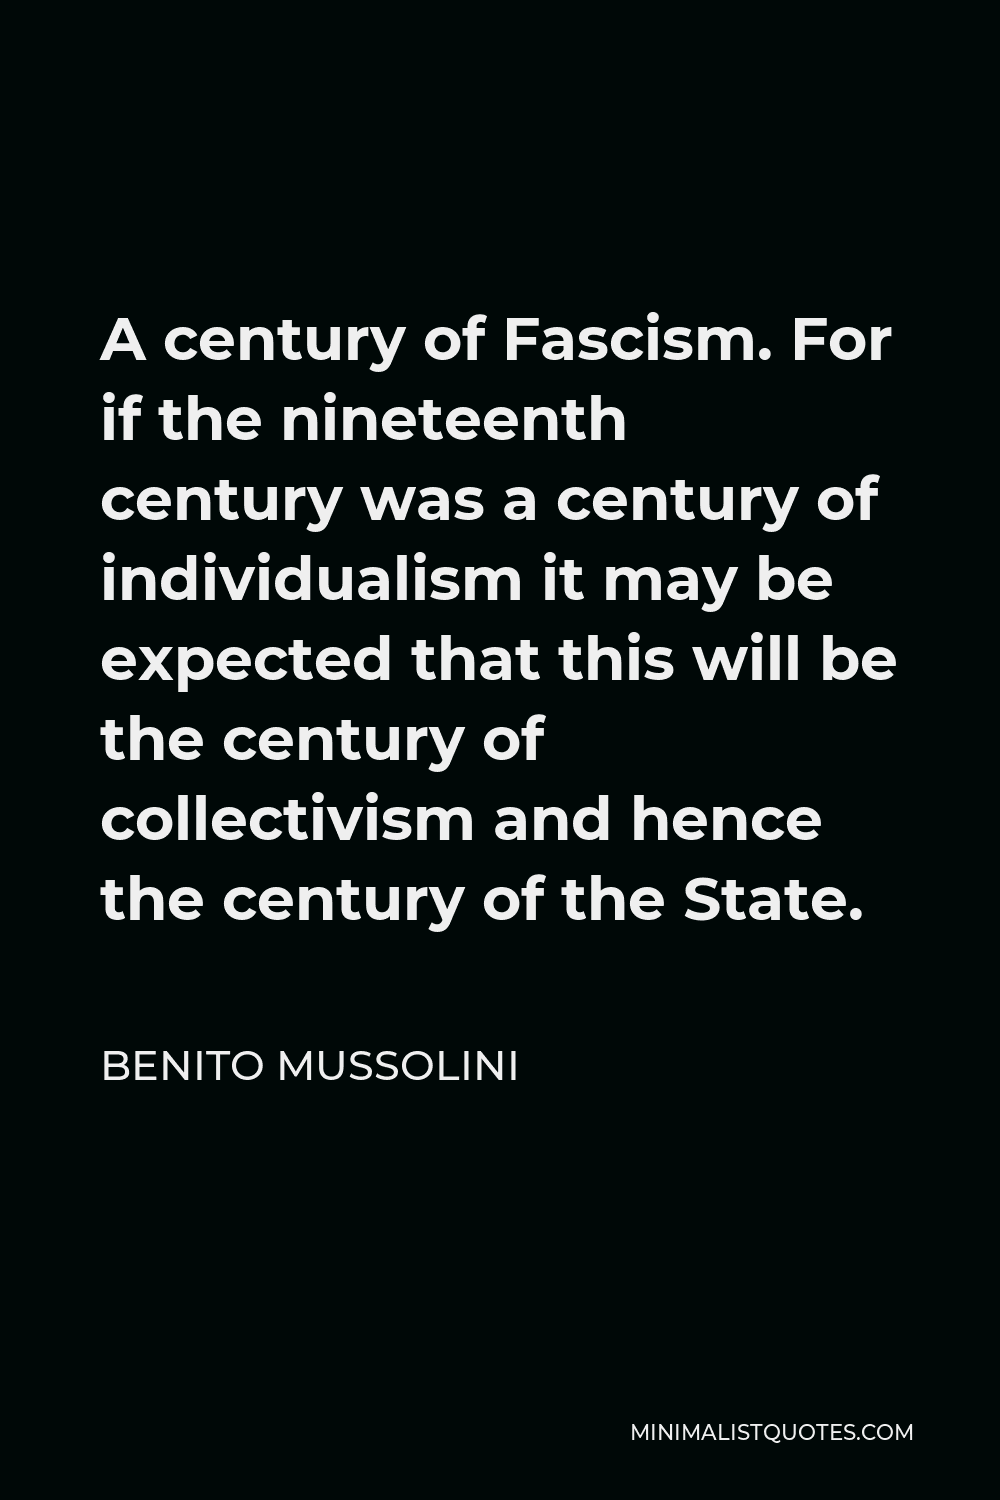 Benito Mussolini Quote - A century of Fascism. For if the nineteenth century was a century of individualism it may be expected that this will be the century of collectivism and hence the century of the State.